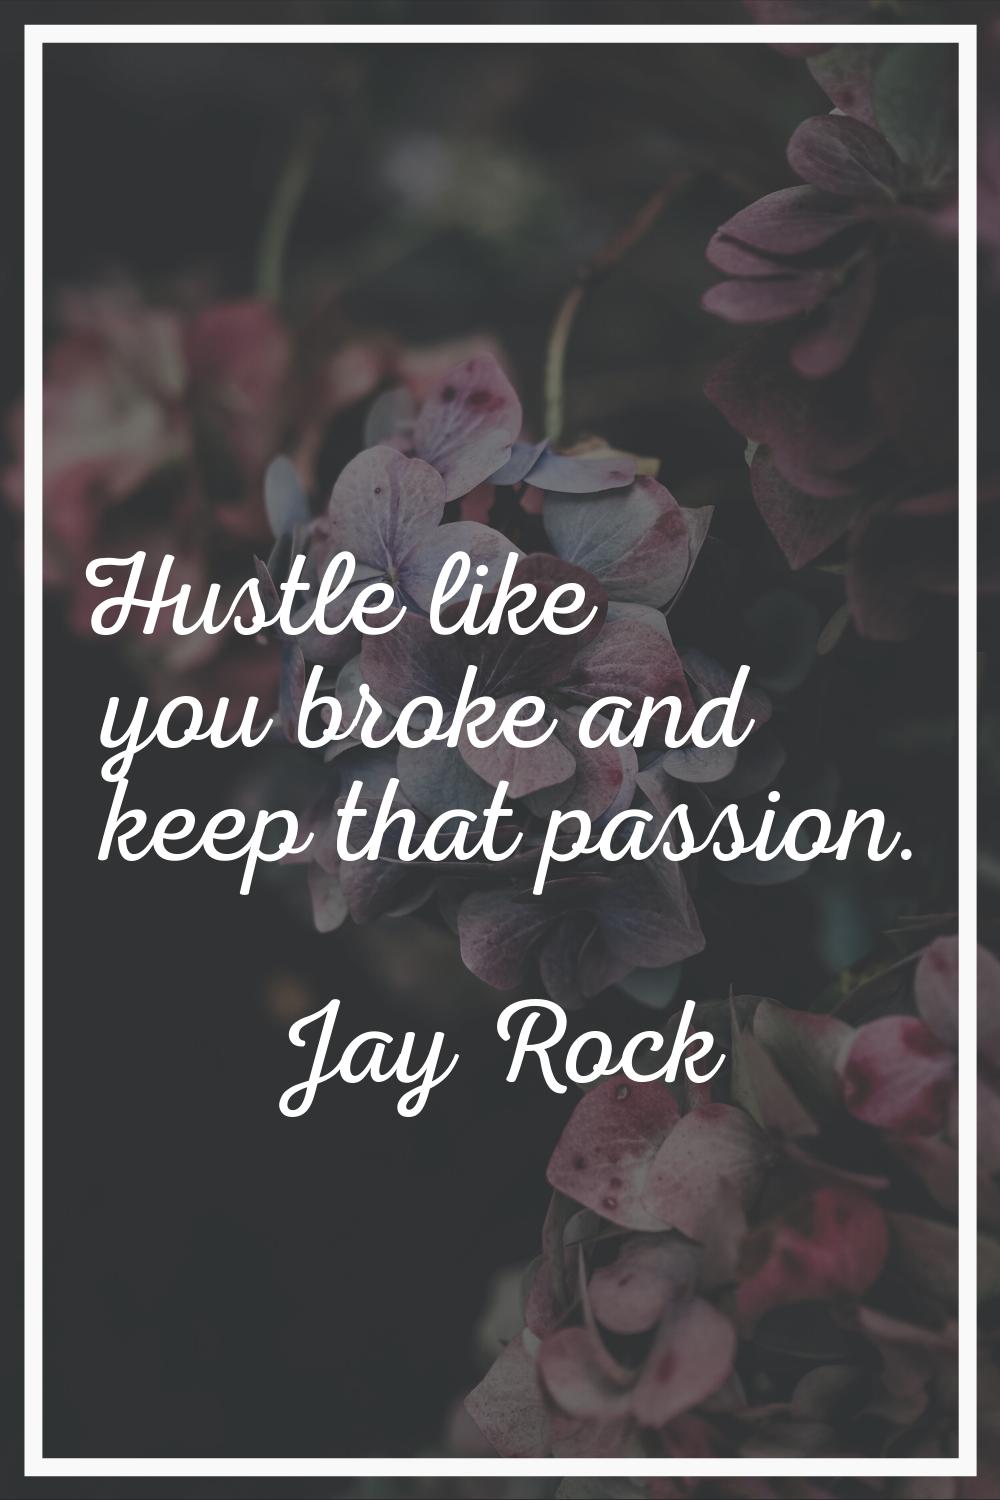 Hustle like you broke and keep that passion.